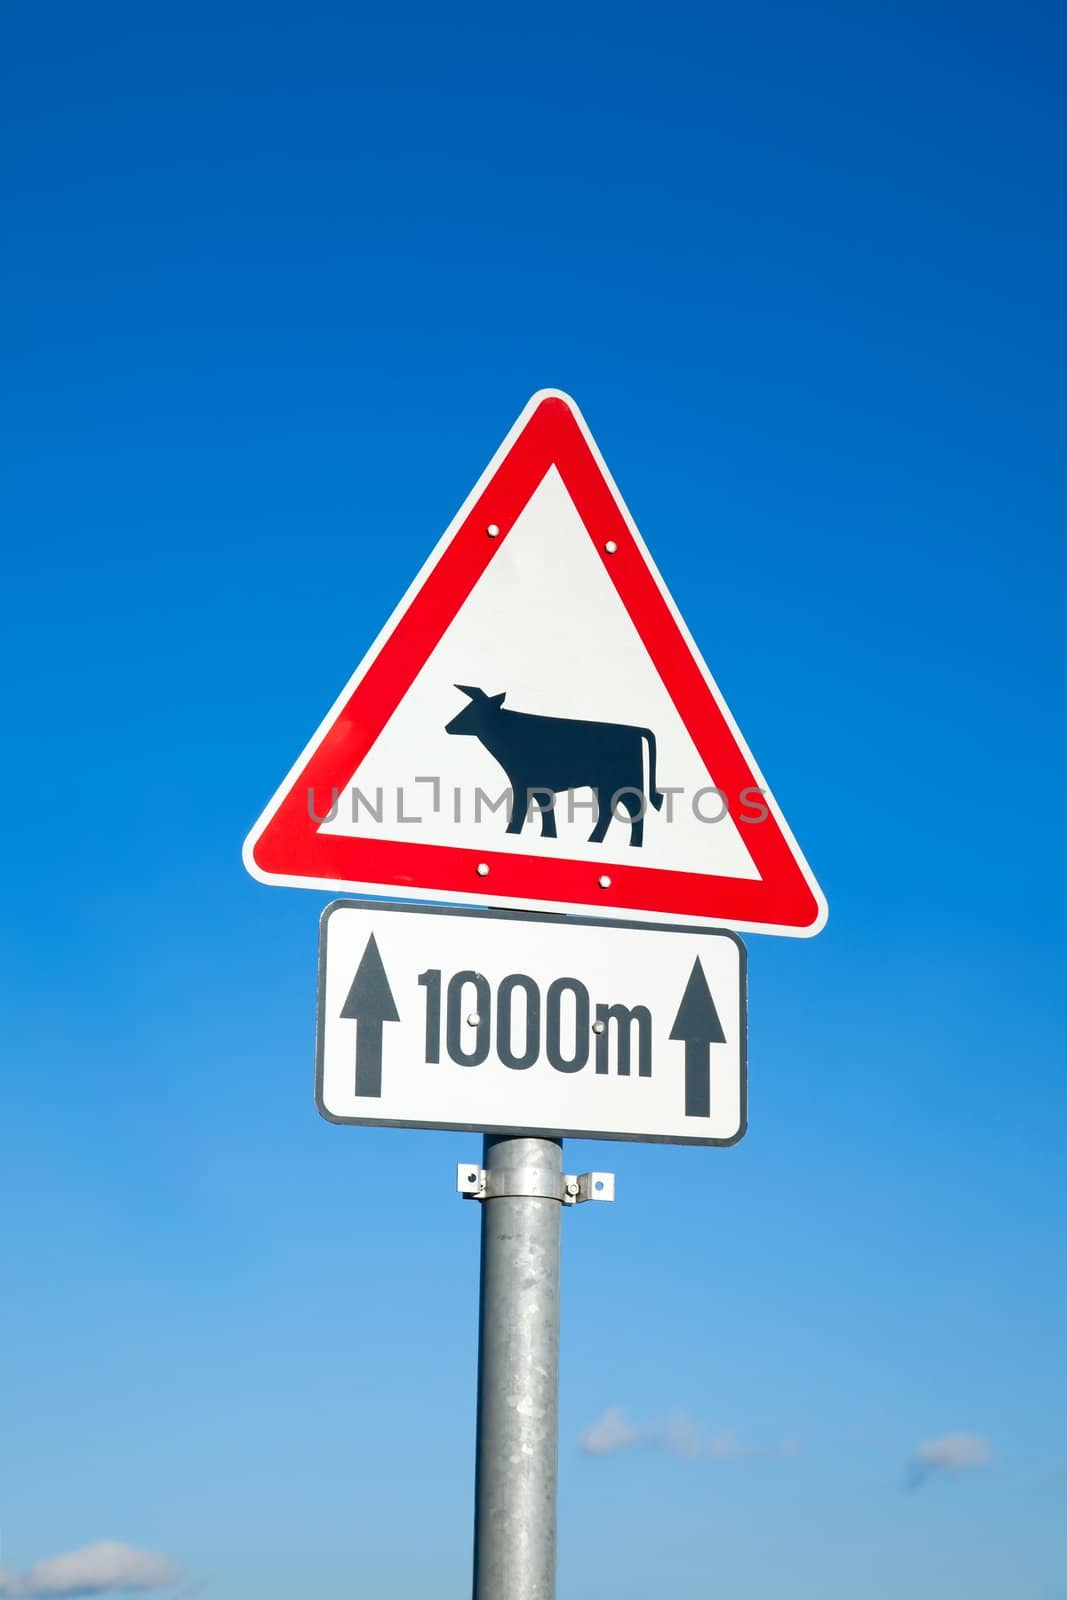 Traffic sign warns about possible cows ahead